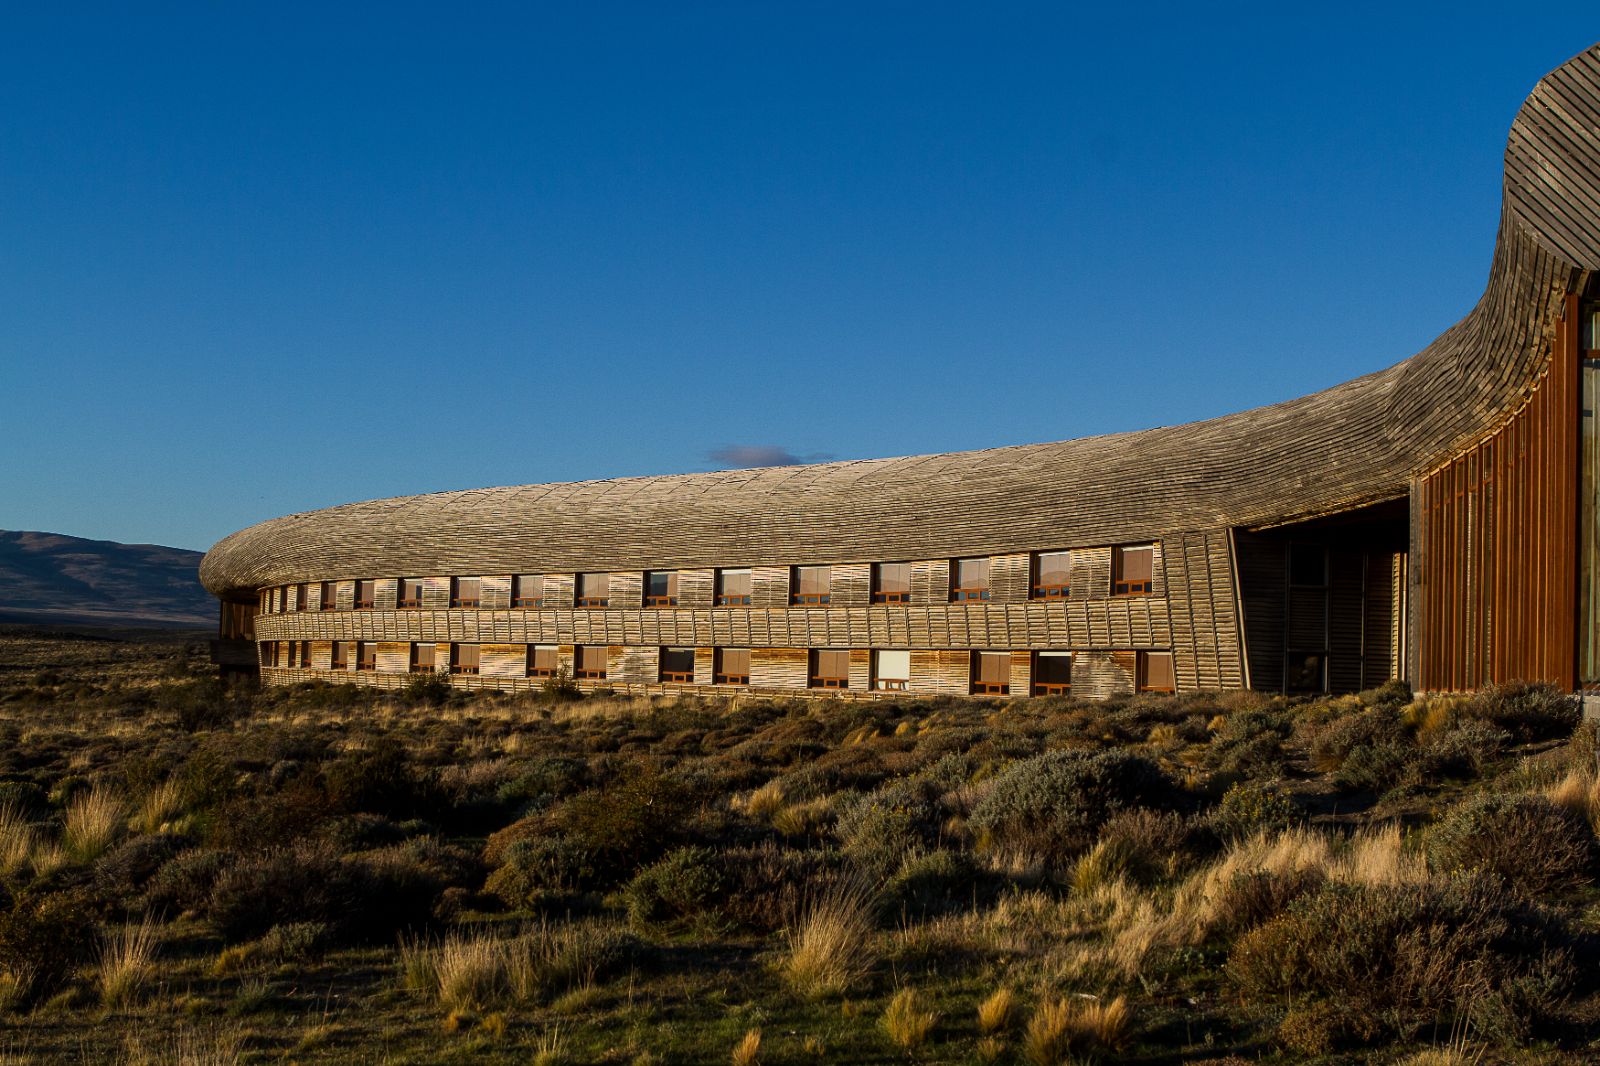 Exterior view of Tierra Patagonia hotel in Chile